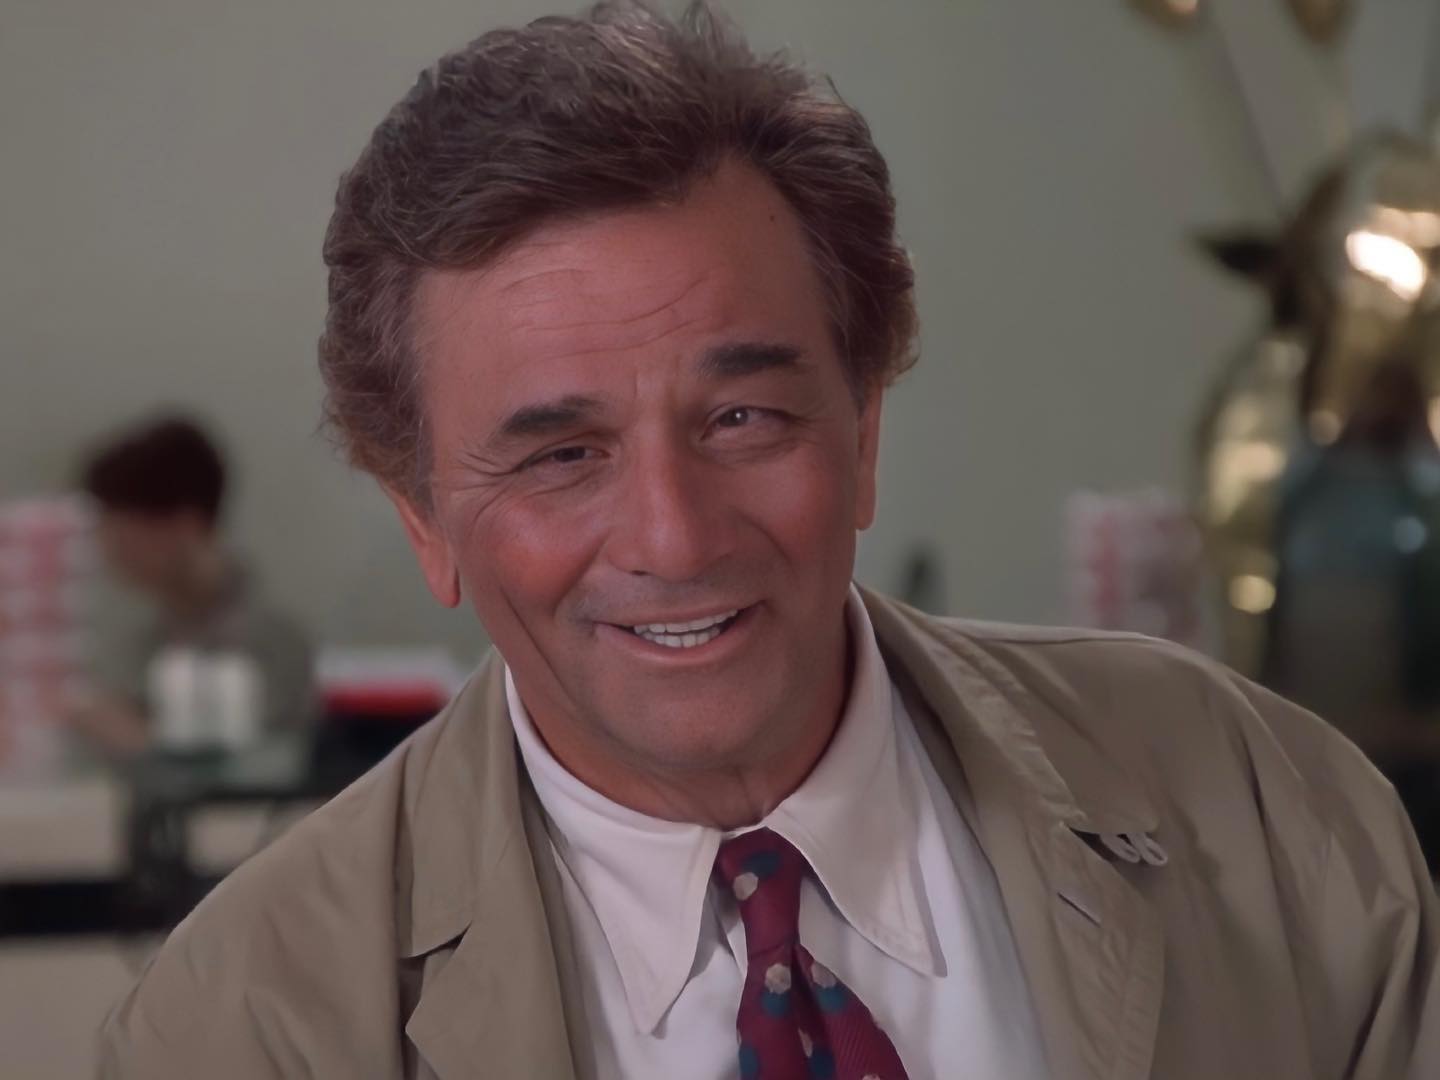 🚨 TIMELINE CLEANSER 🚨 Adorable grandpa Columbo with his new tie in 1993’s ‘It’s All in the Game’ 😊
—————————
#ltcolumbo #Columbo #peterfalk  #classictv #90s #1993